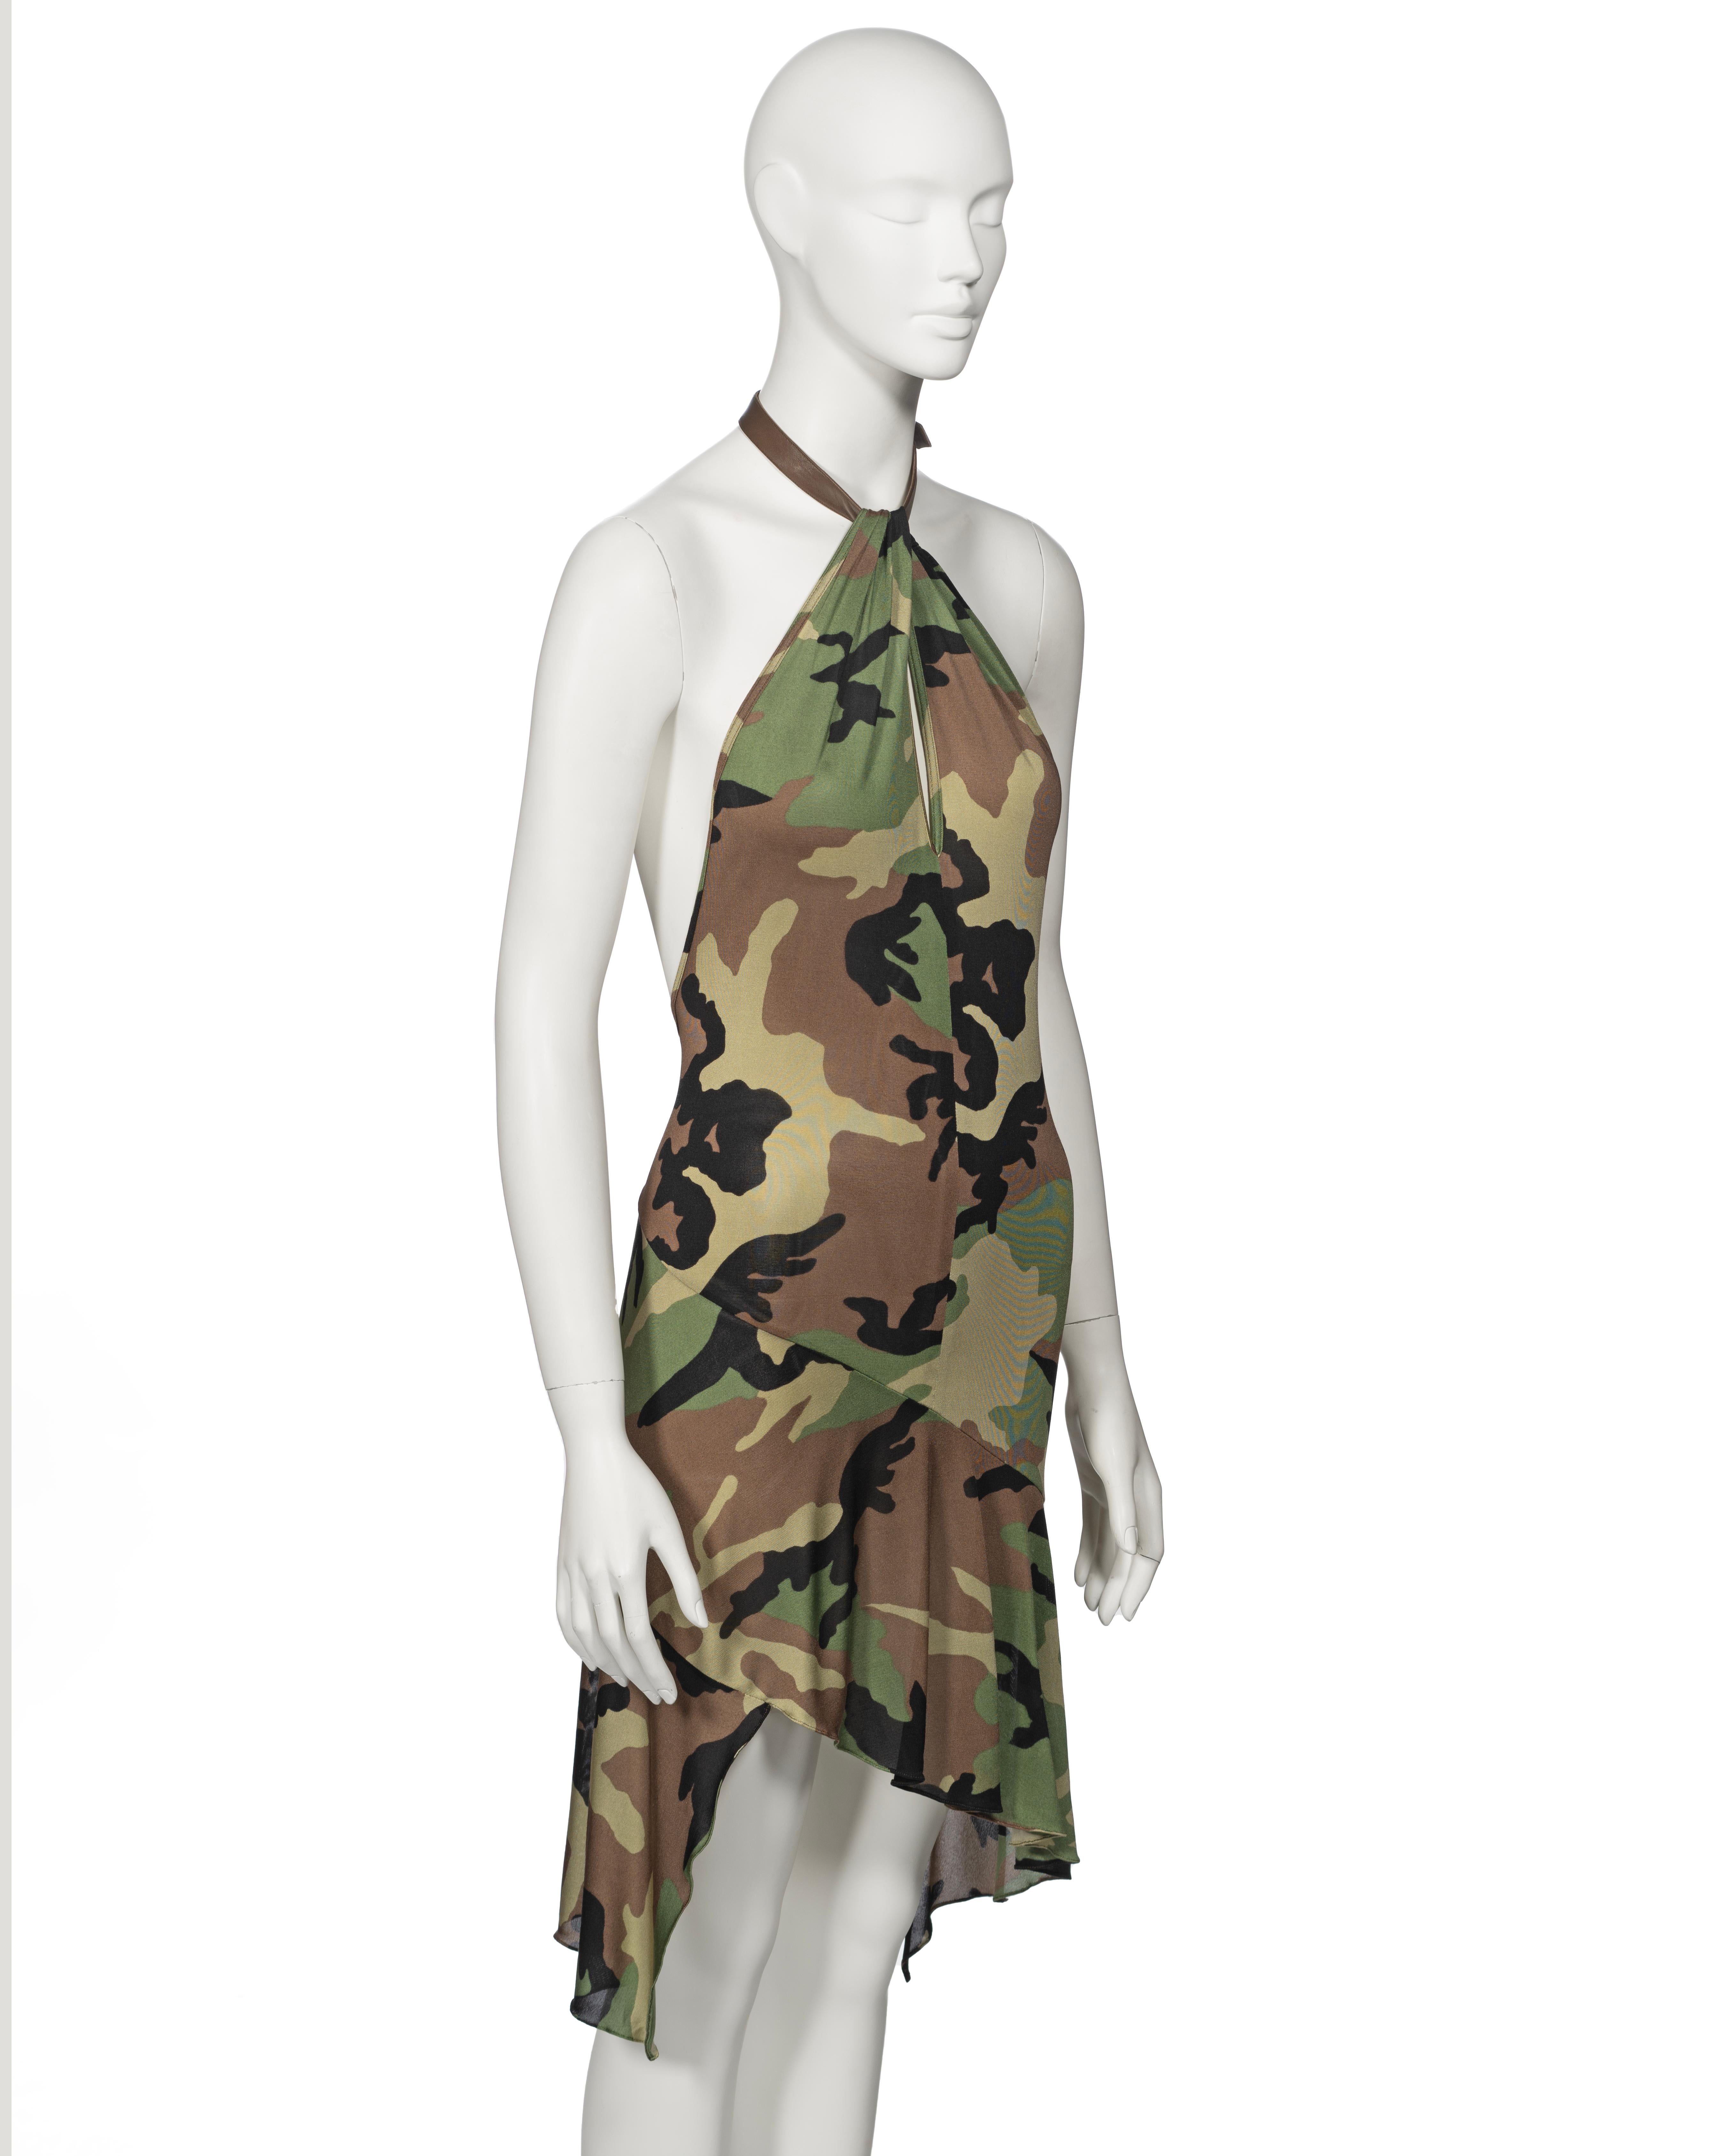 Christian Dior by John Galliano Cameo Print Silk Jersey Halter Dress, ss 2001 For Sale 1